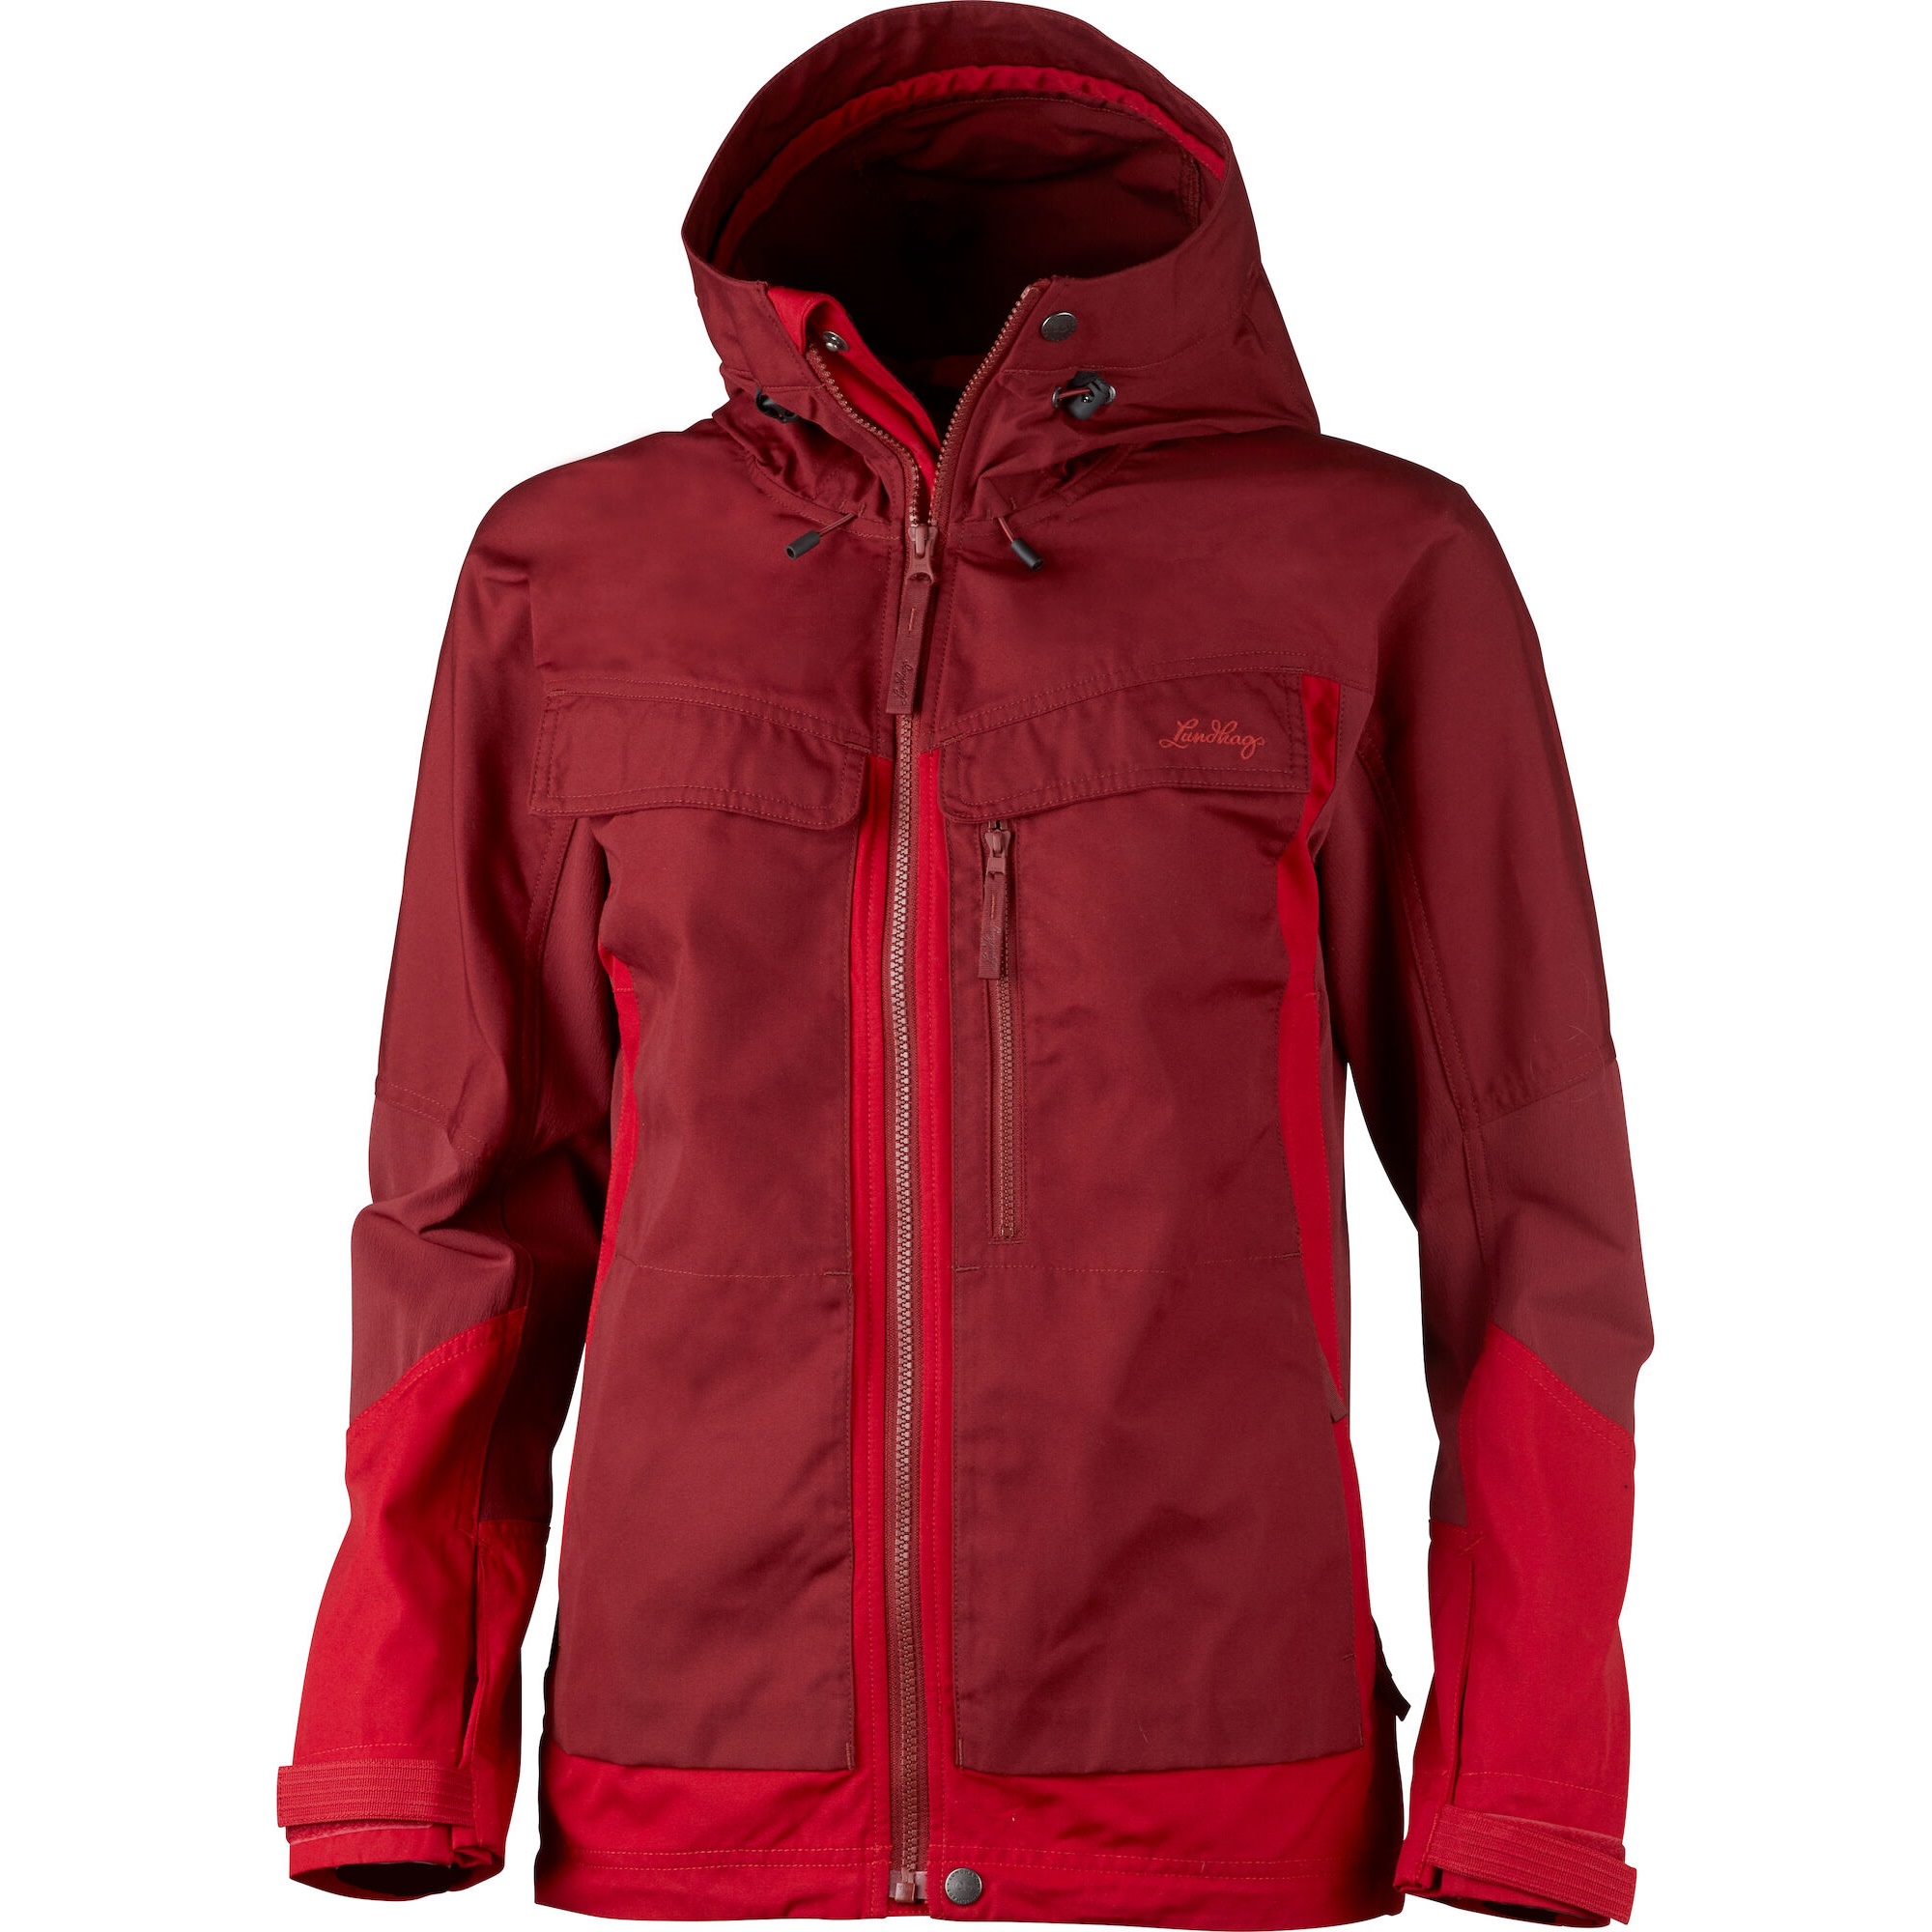 Lundhags Women’s Authentic Jacket Red/Dk Red